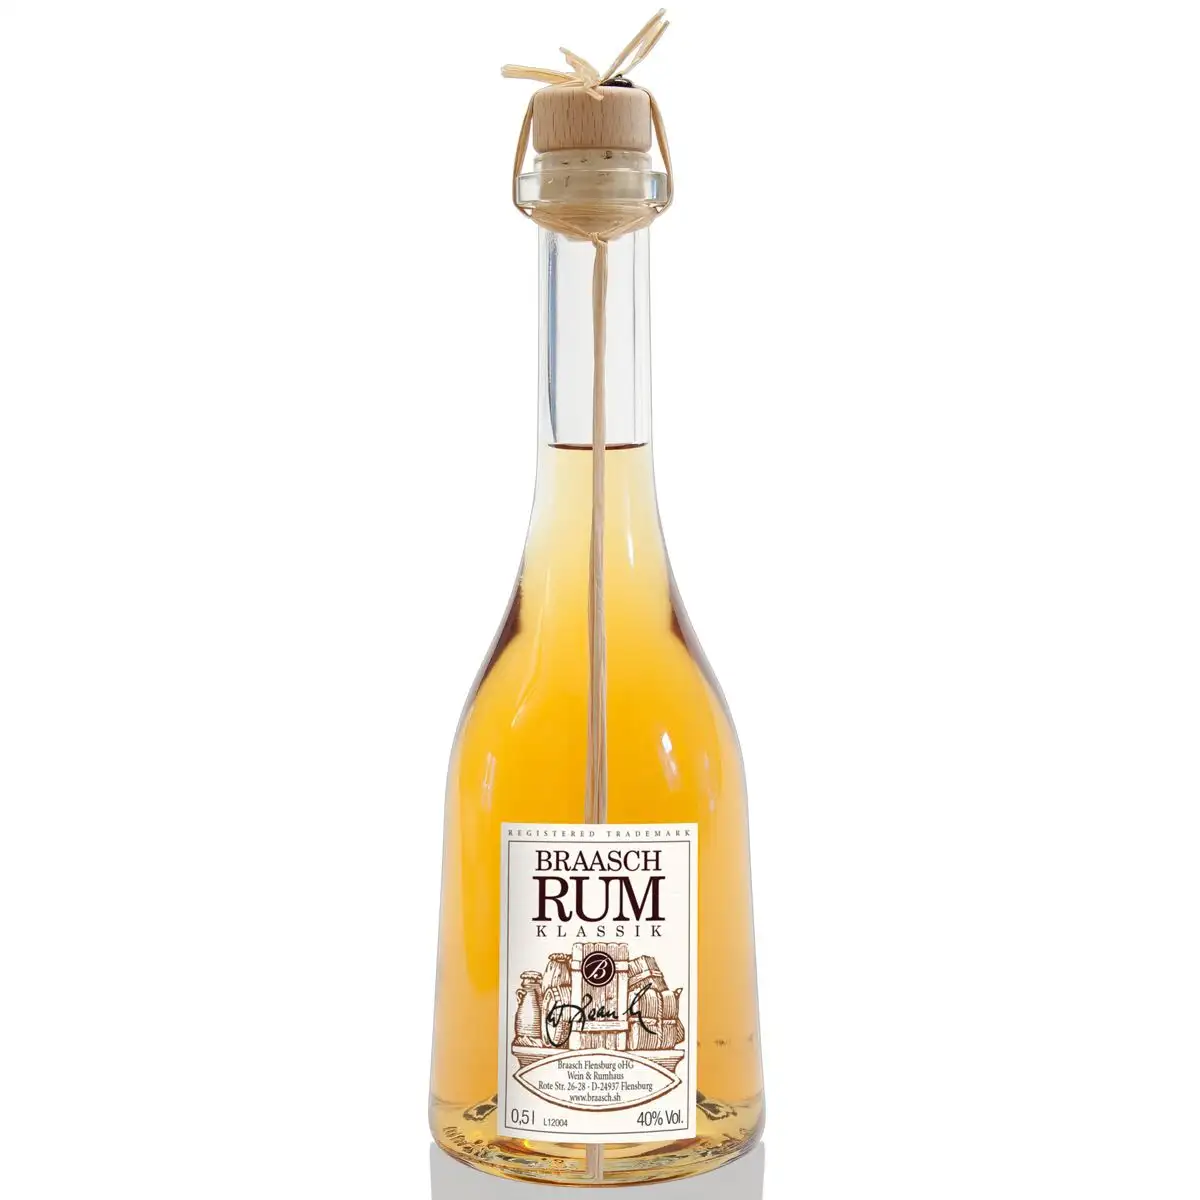 Image of the front of the bottle of the rum Rum Klassik